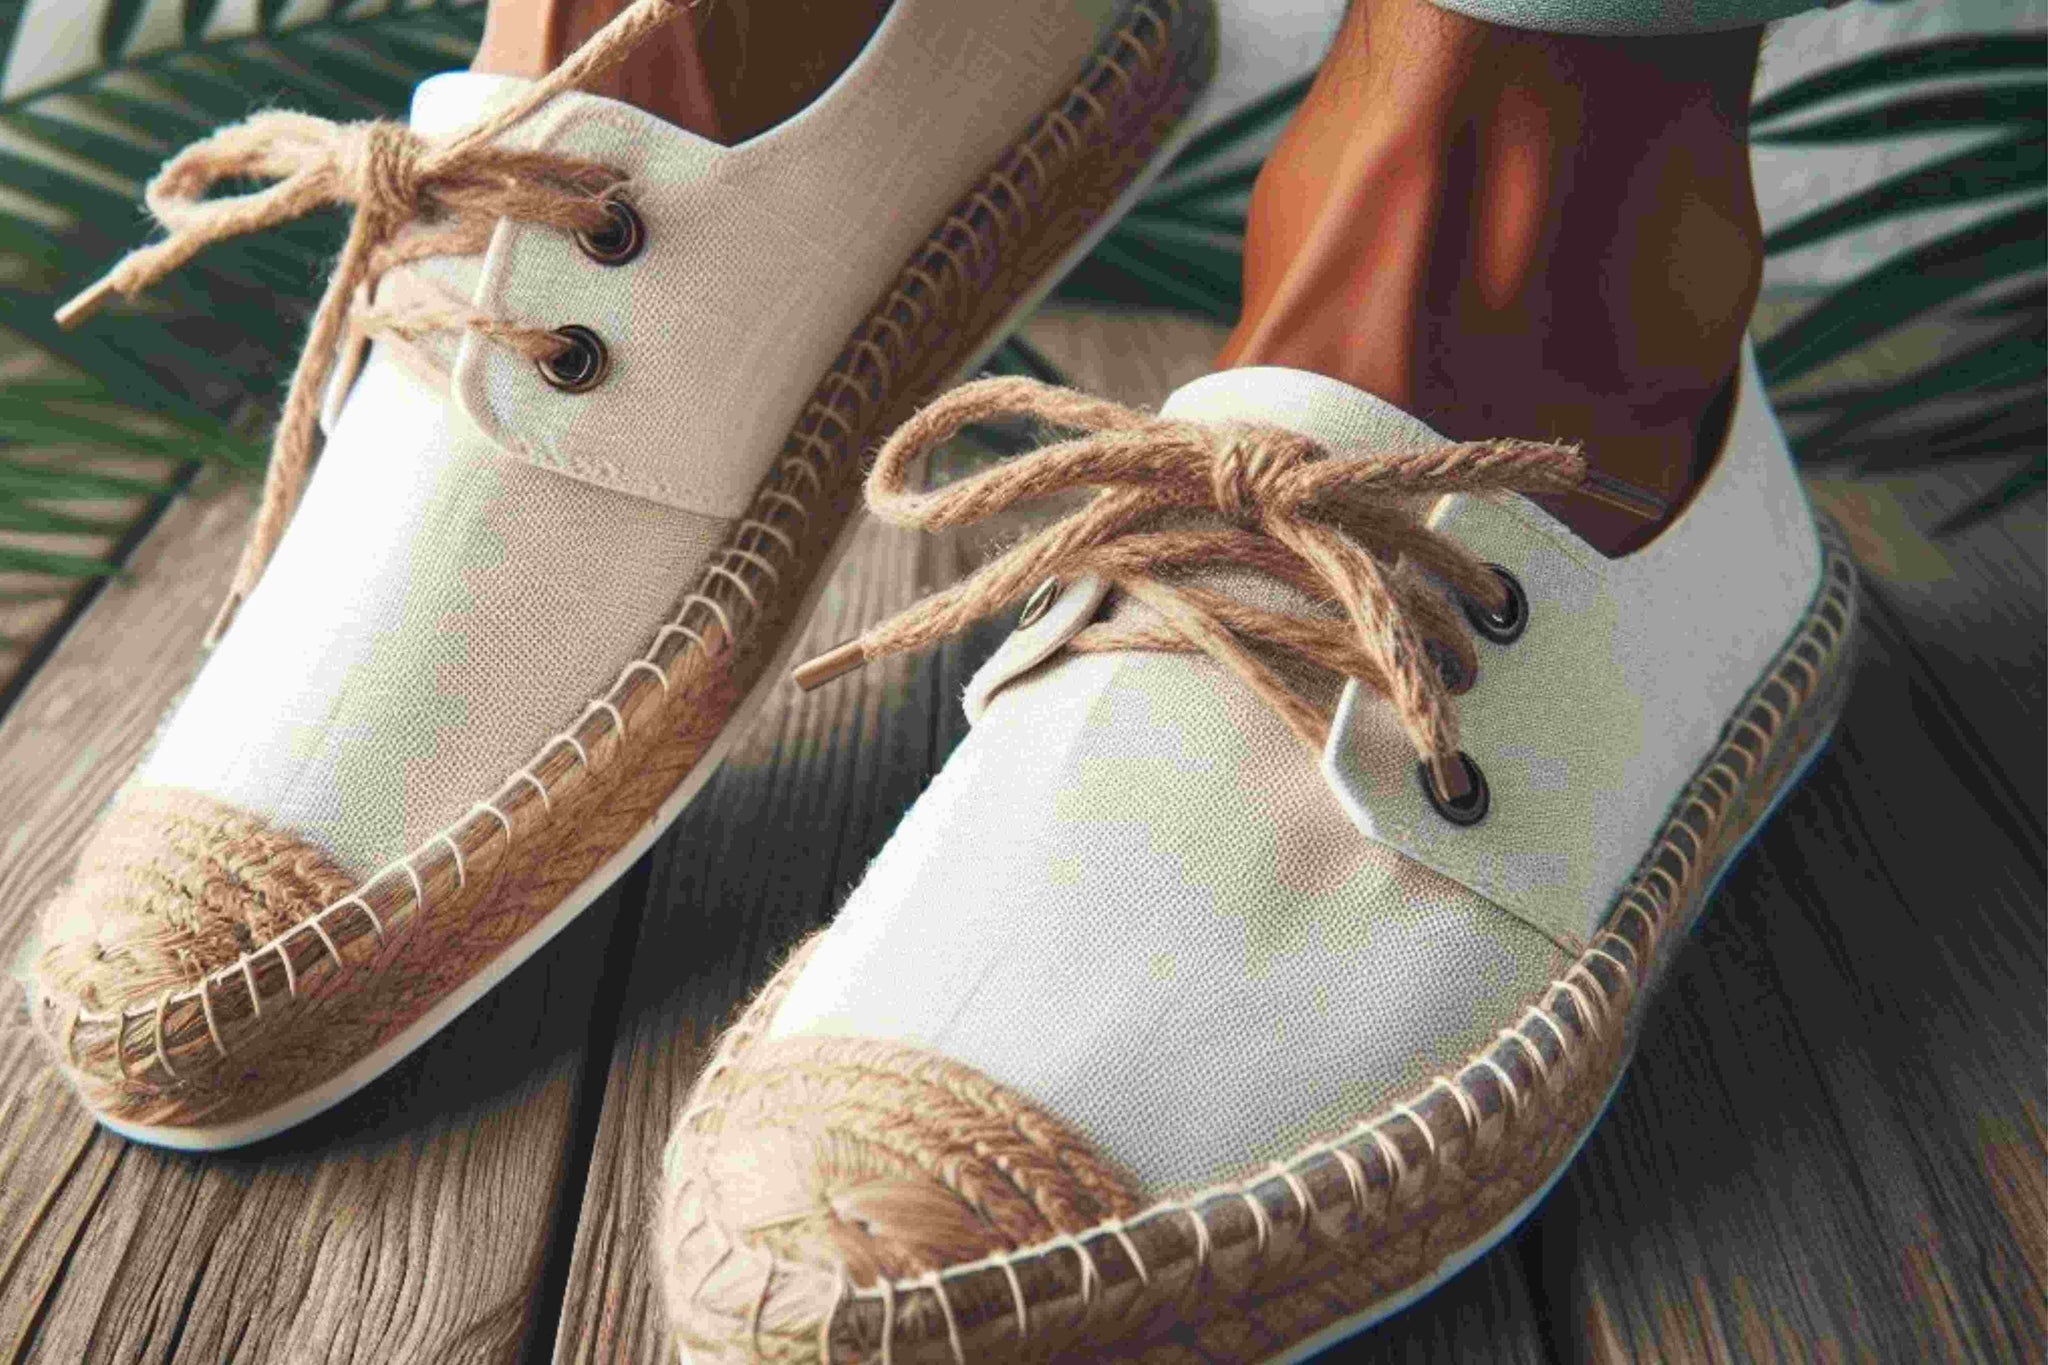 Summer Vibes: Men's Espadrilles for Laid-Back Style